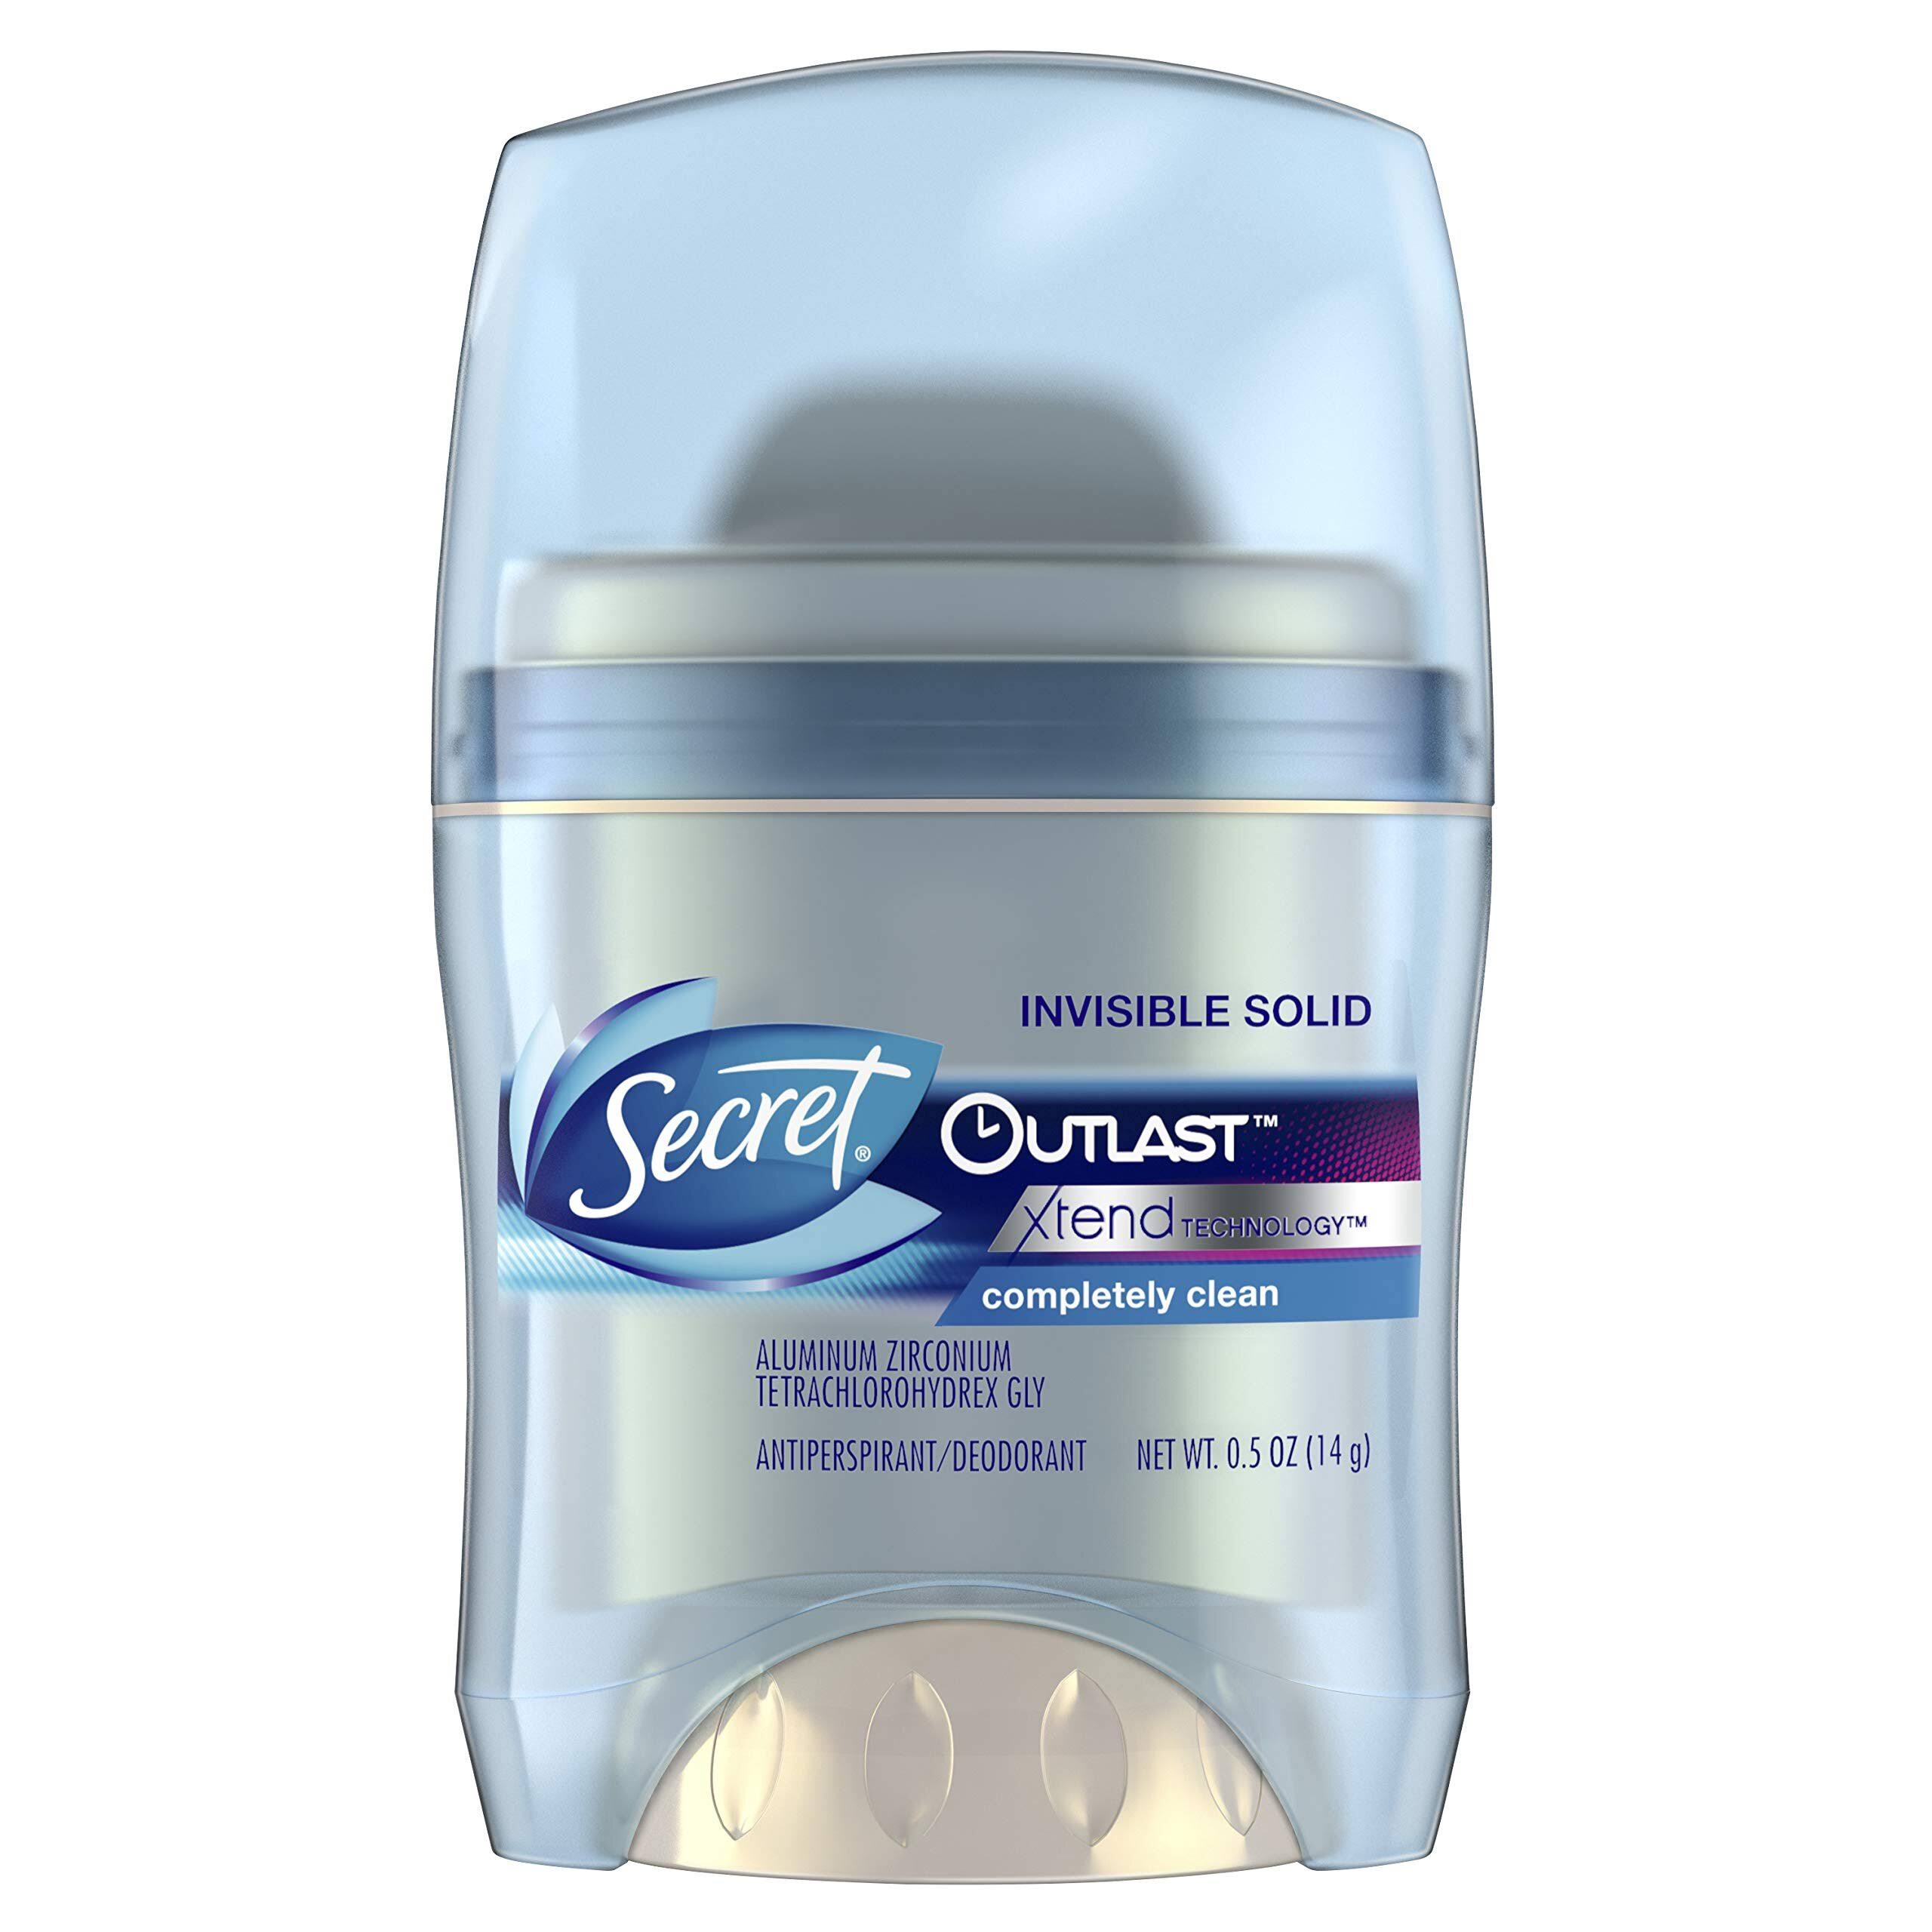 Secret Outlast Invisible Solid Antiperspirant and Deodorant - Completely Clean Scent, 0.5oz